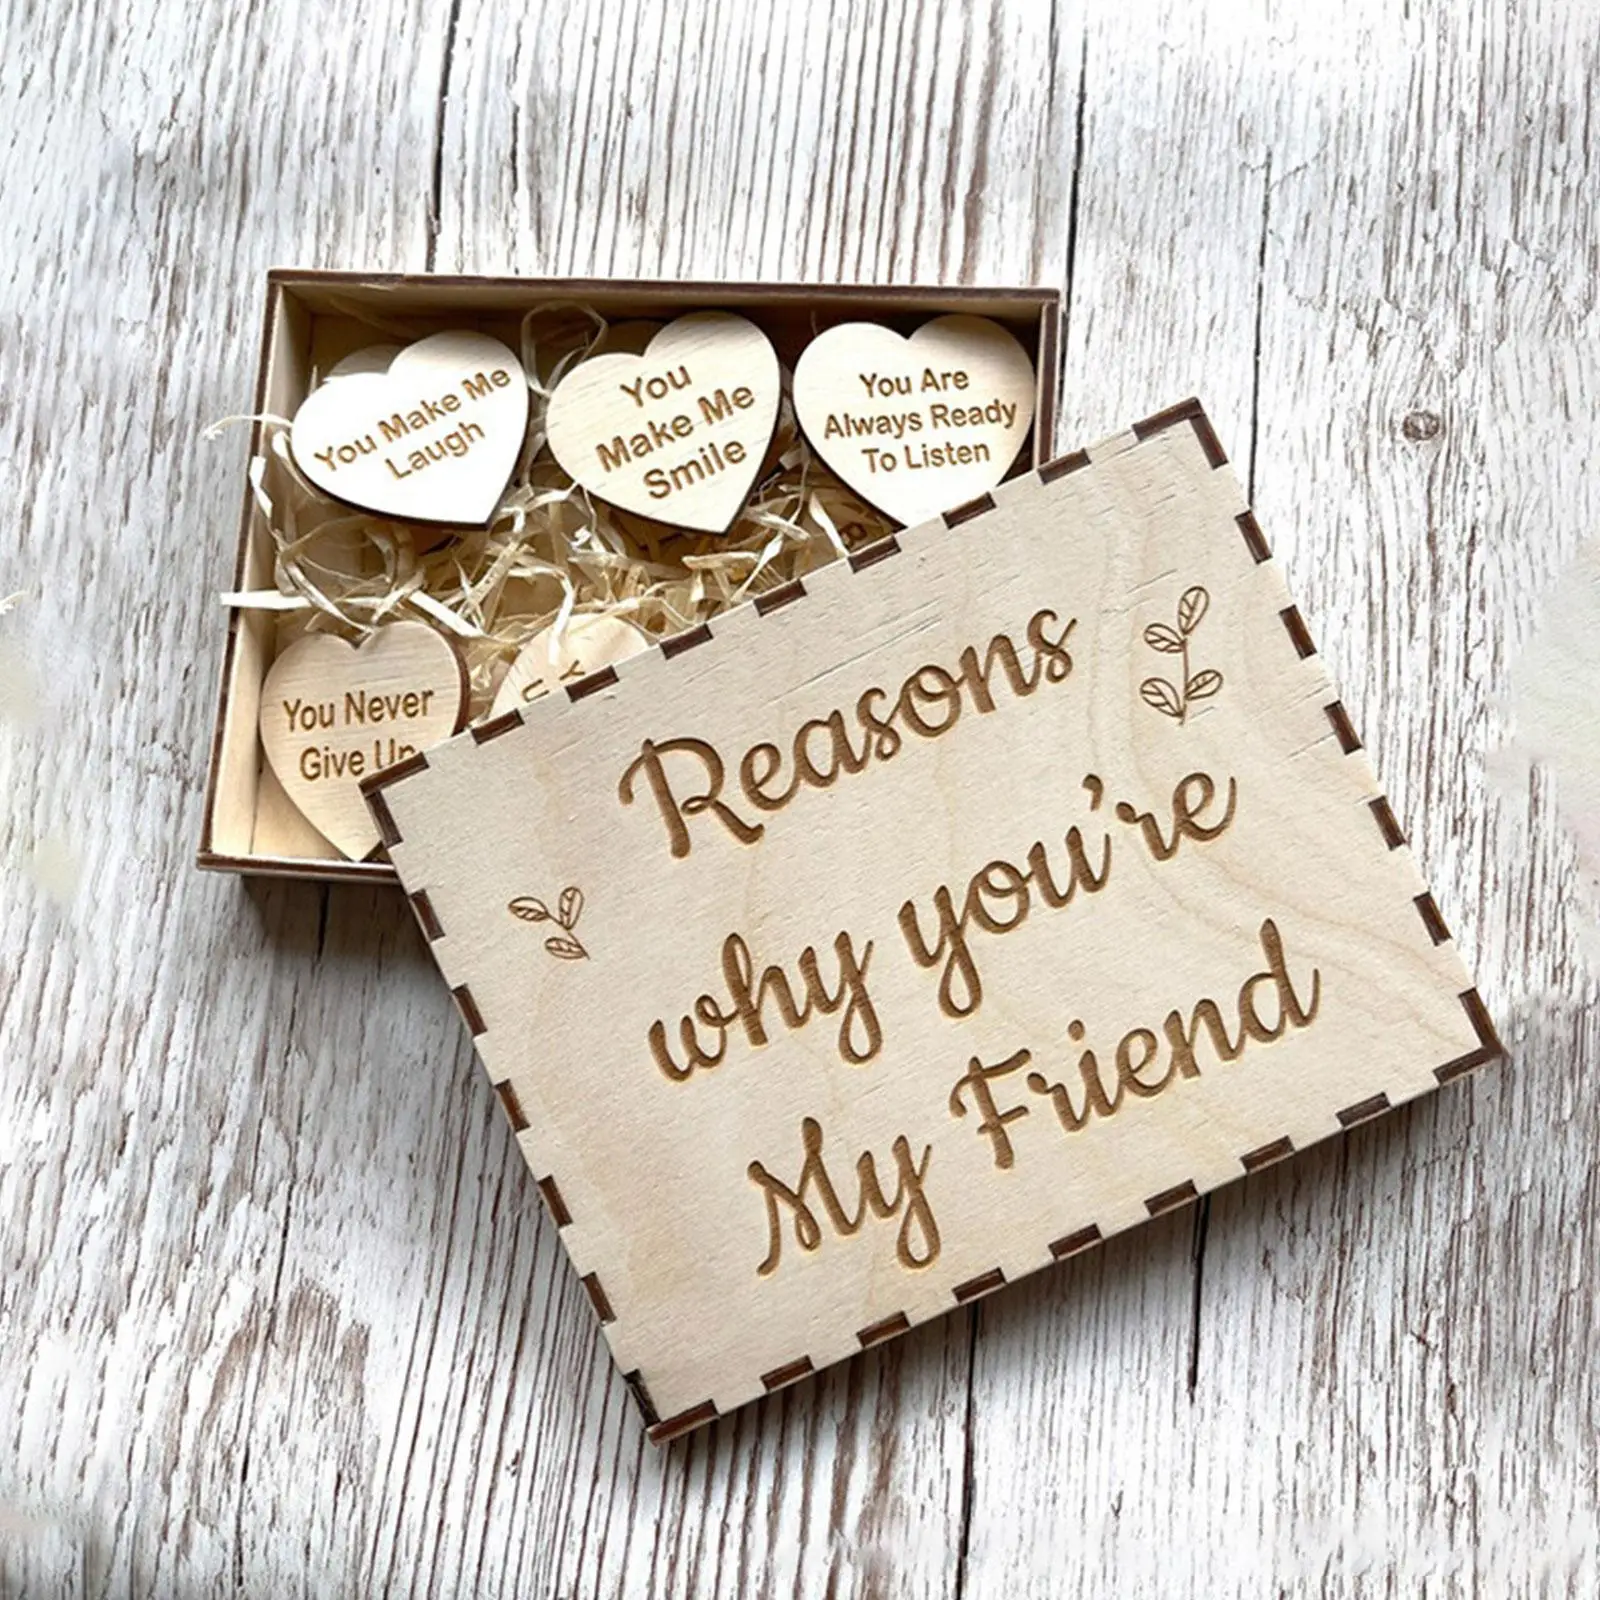 

"Reasons Why You Are My Friend" Friendship Gift Unique Friendship Gift Decorative Wood Chips Favor Festive Party Christmas Gifts